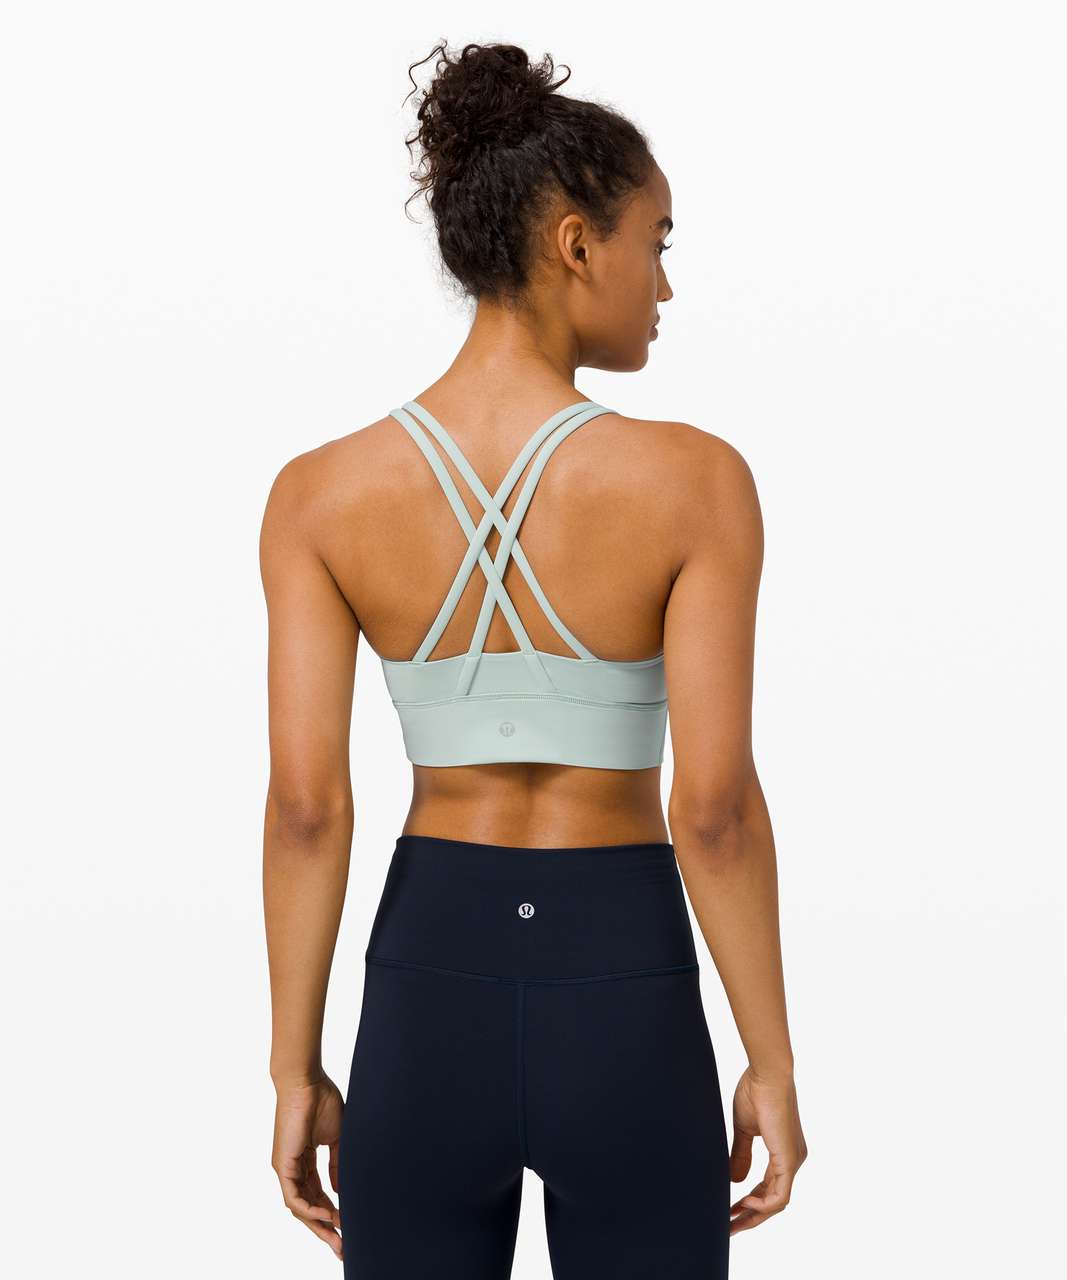 Hazy jade fit pics! feat. my like a cloud bra which I unfortunately left  out of my hazy jade collection post : r/lululemon